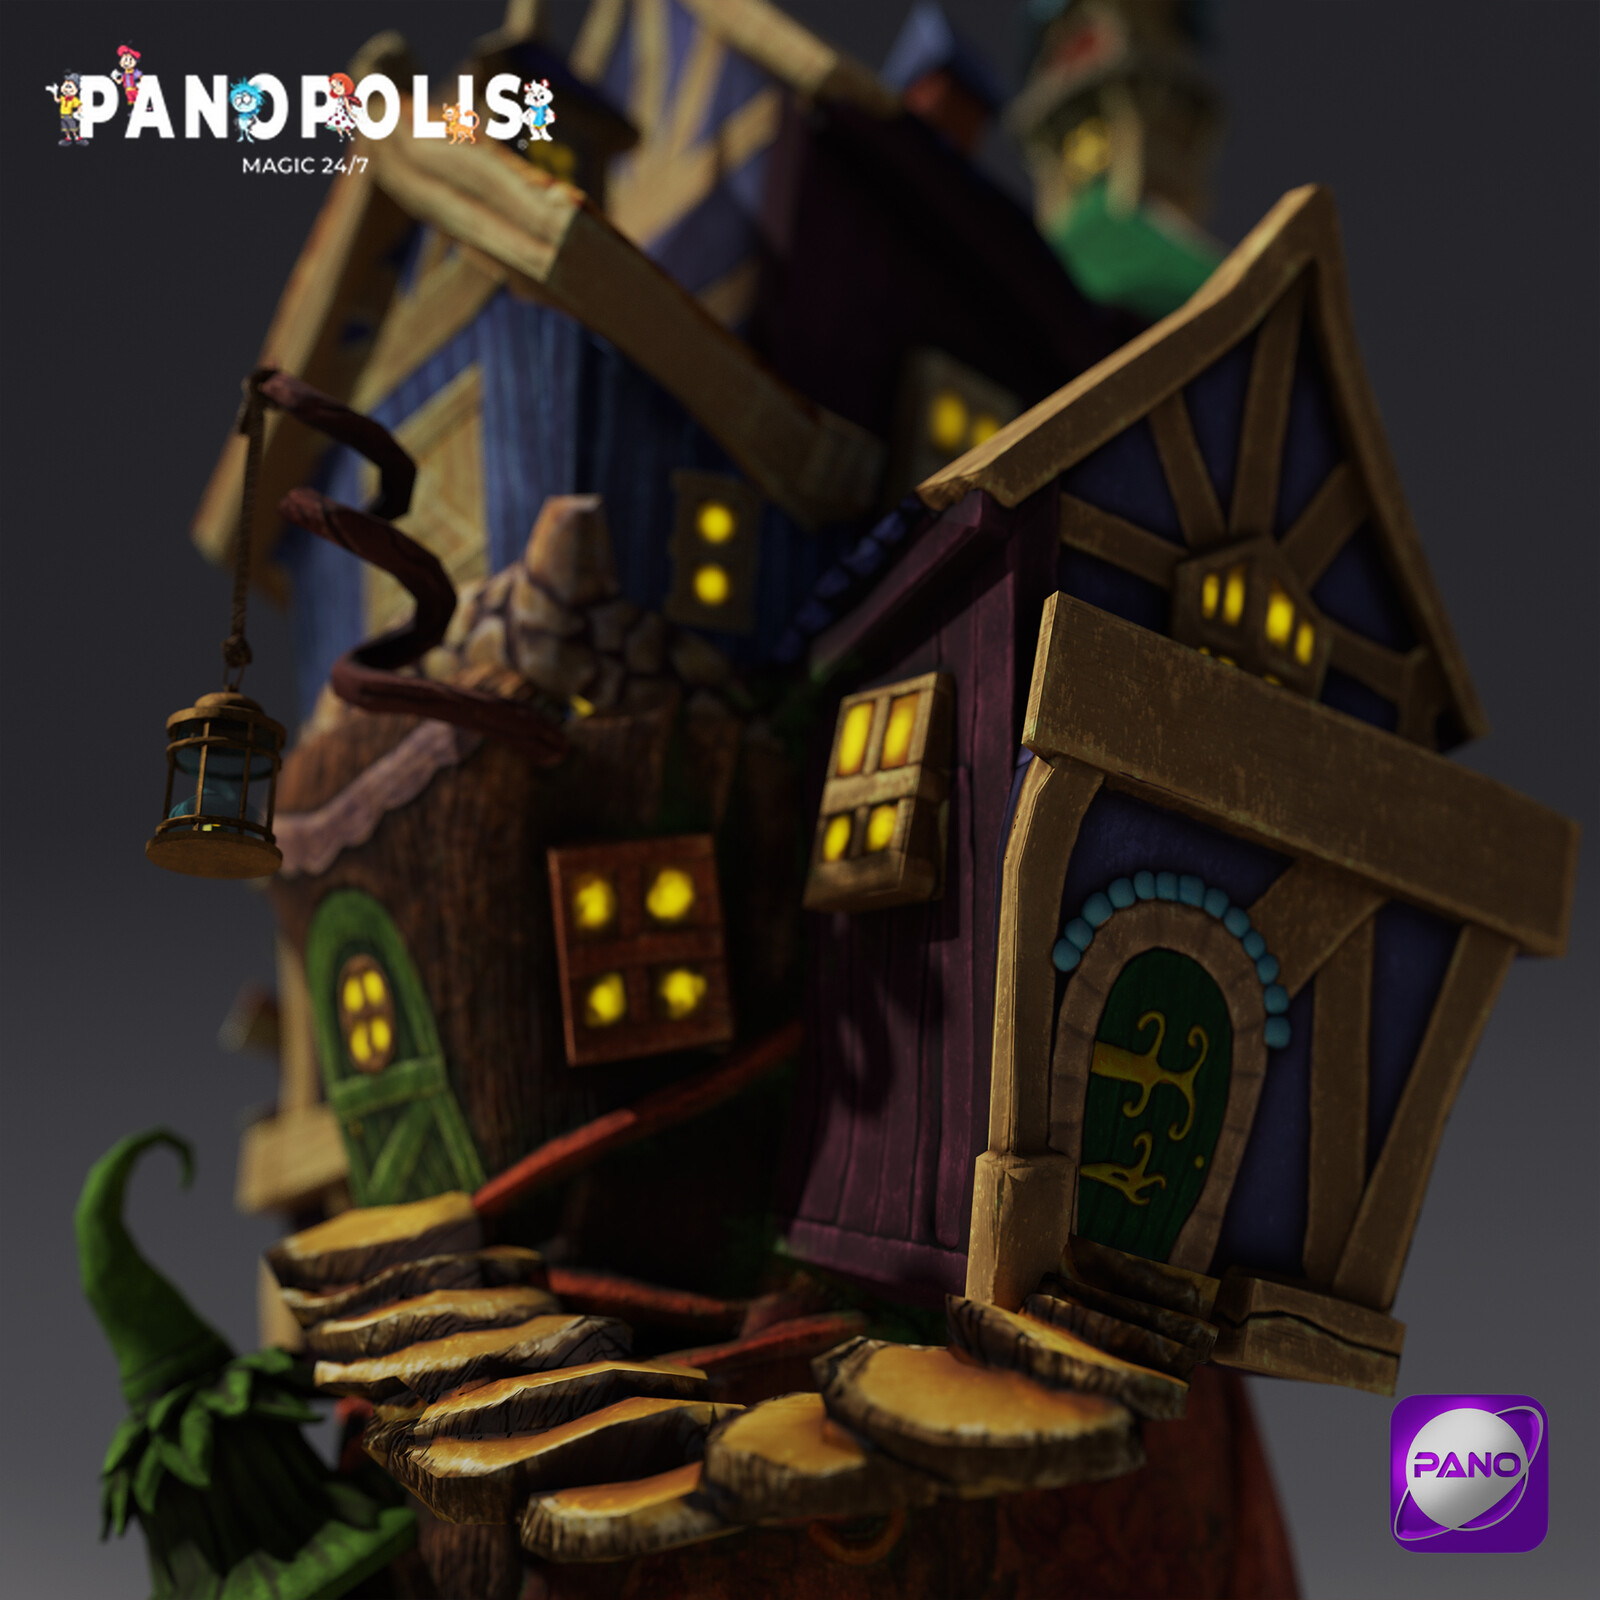 RocketSchas Panopolis: Old Lady’s Shoe House(Unrealeased Project)